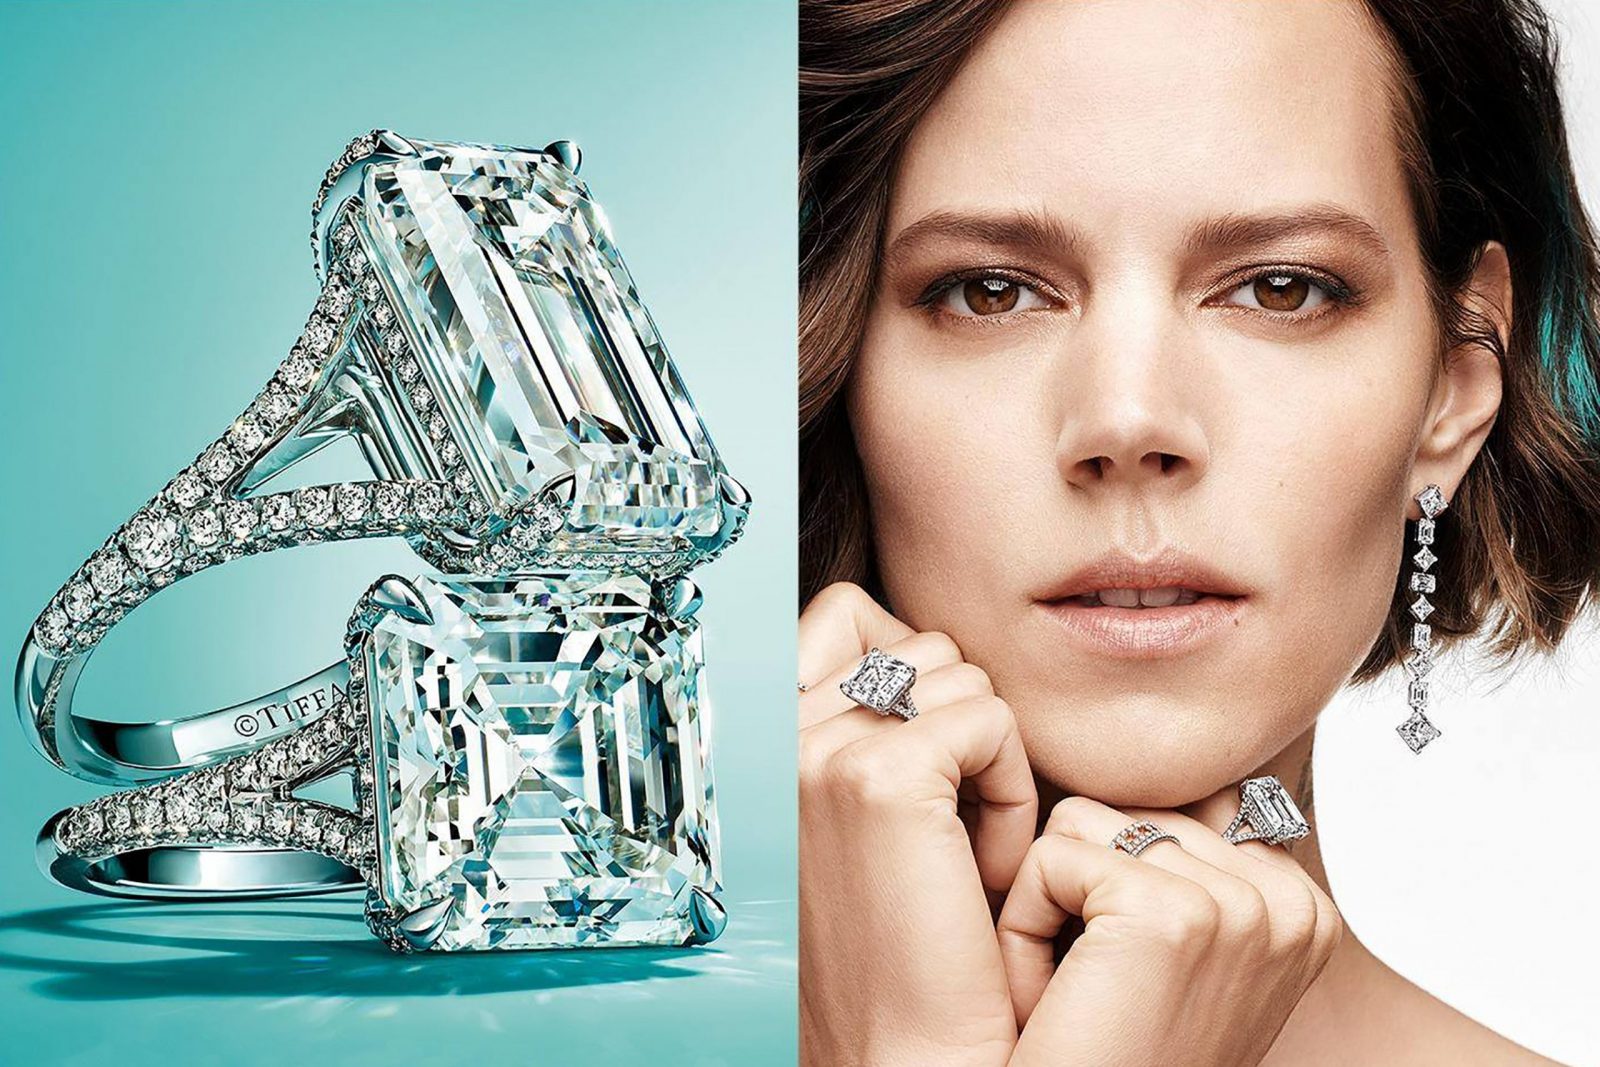 Tiffany & Co. Accuses Fellow Jewelry Co. of Selling Counterfeits